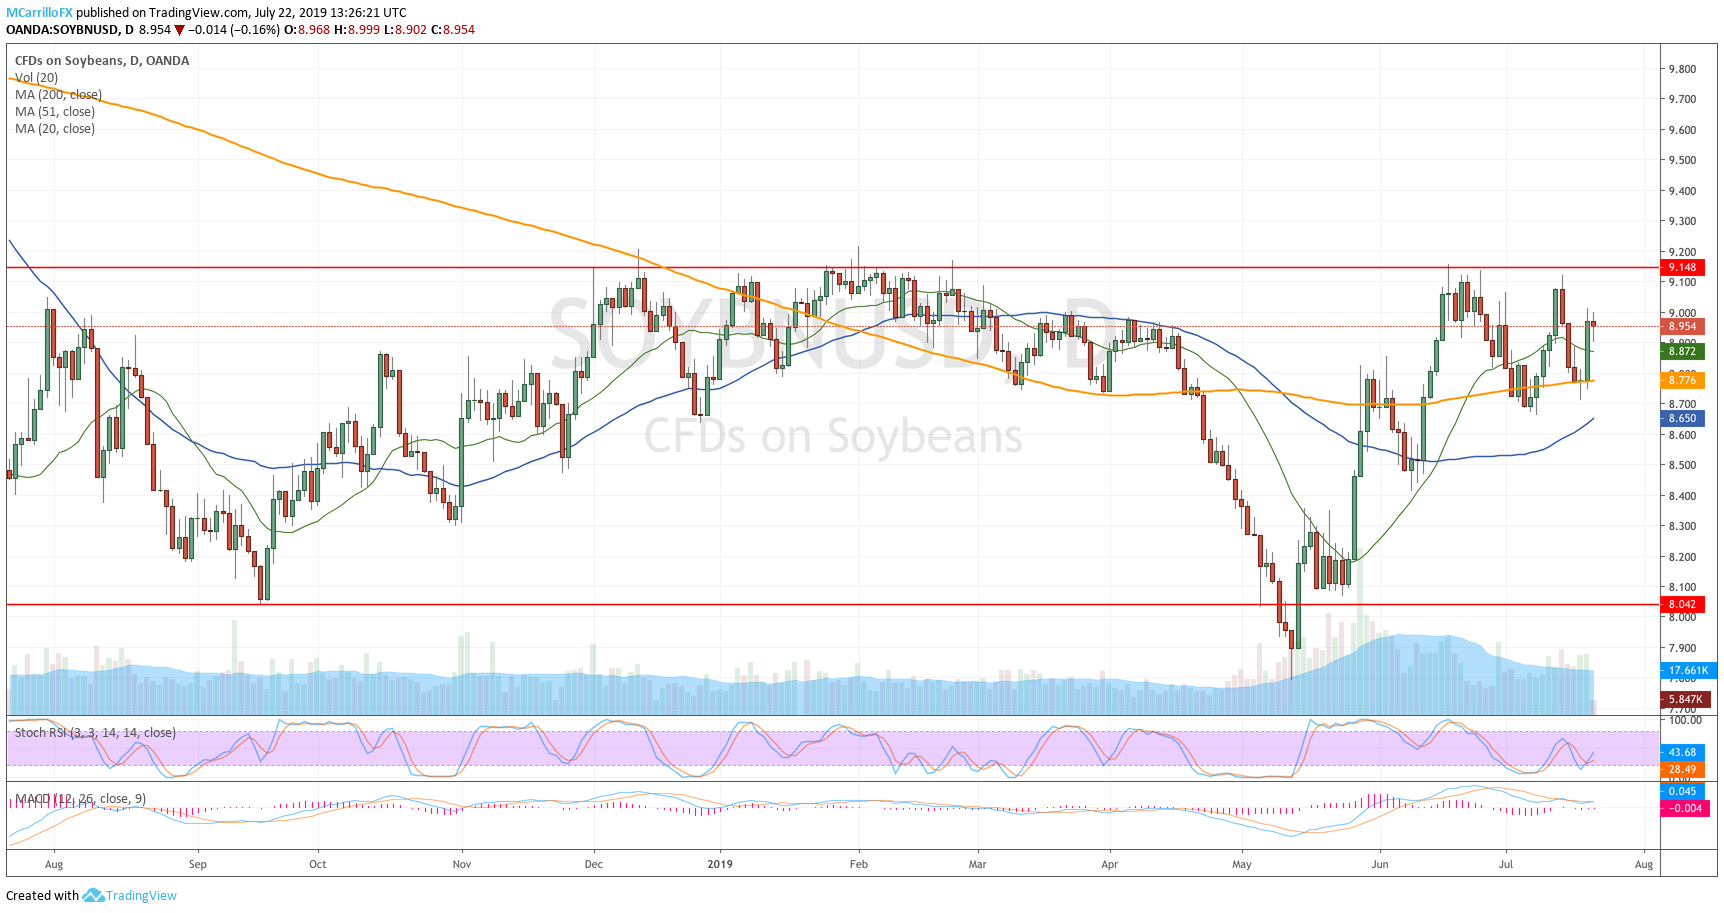 Soybeans daily chart July 22